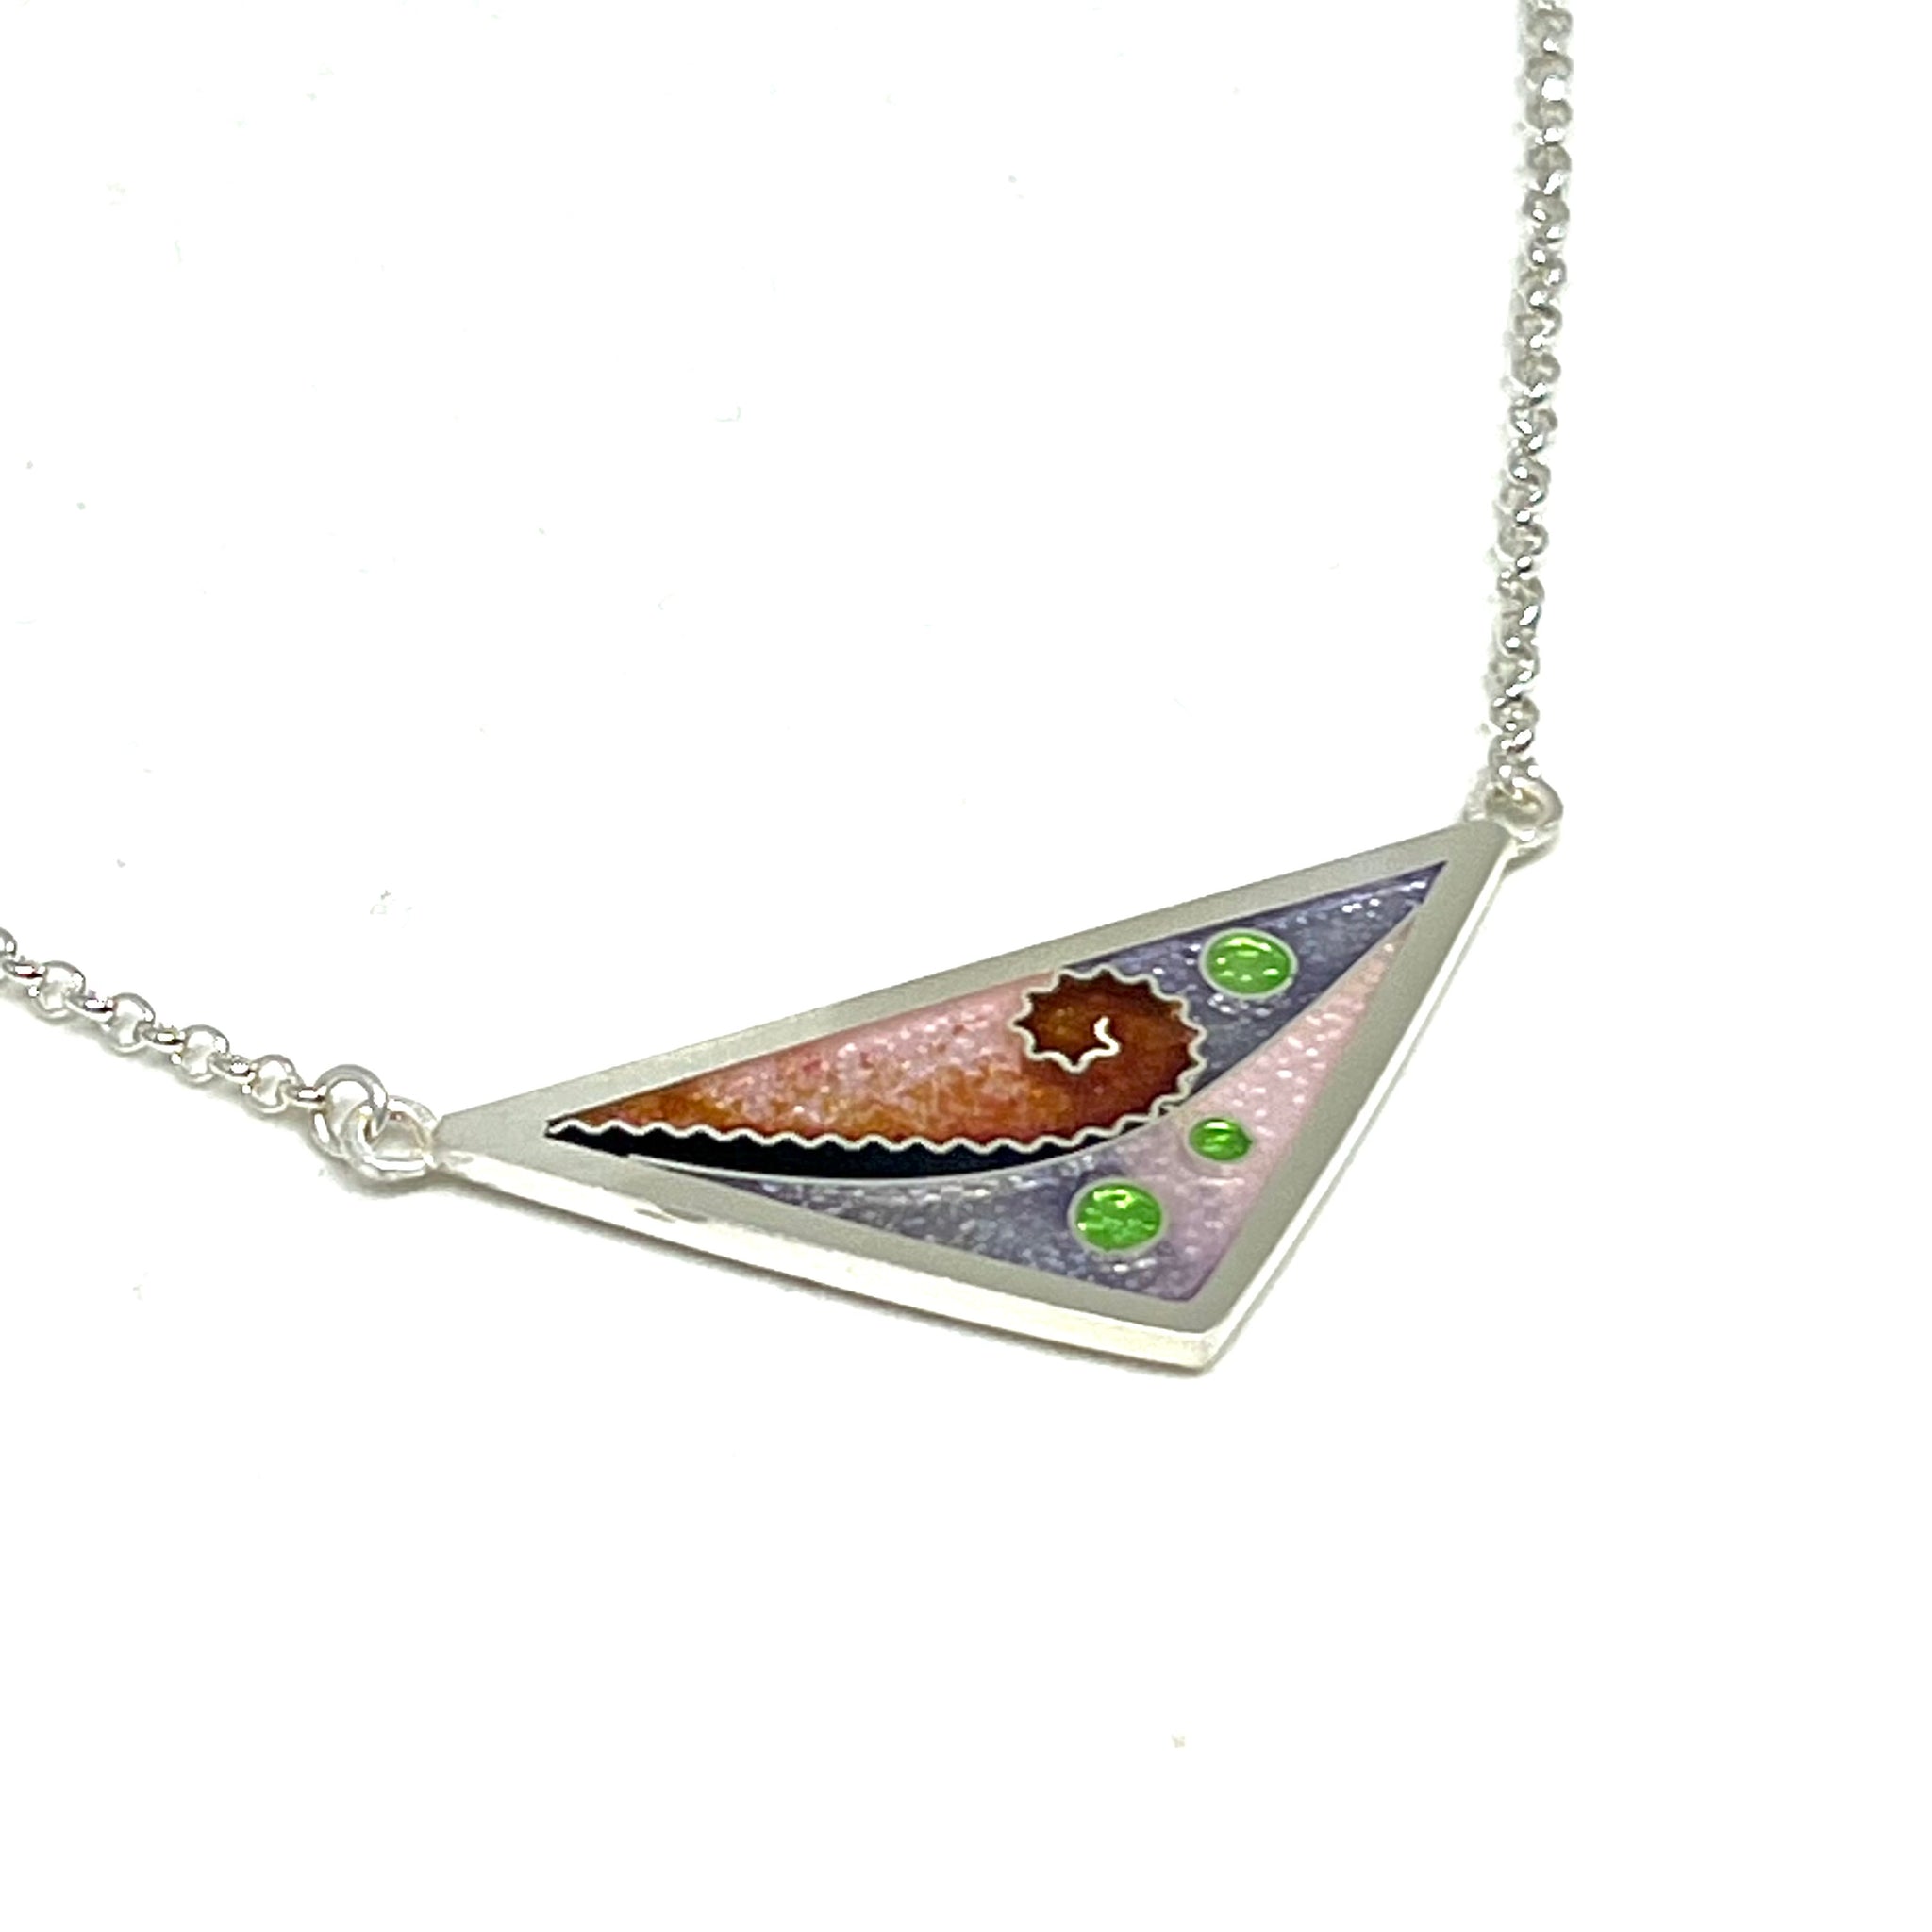 Cloisonne Triangle Necklace (Cherry Blossom)